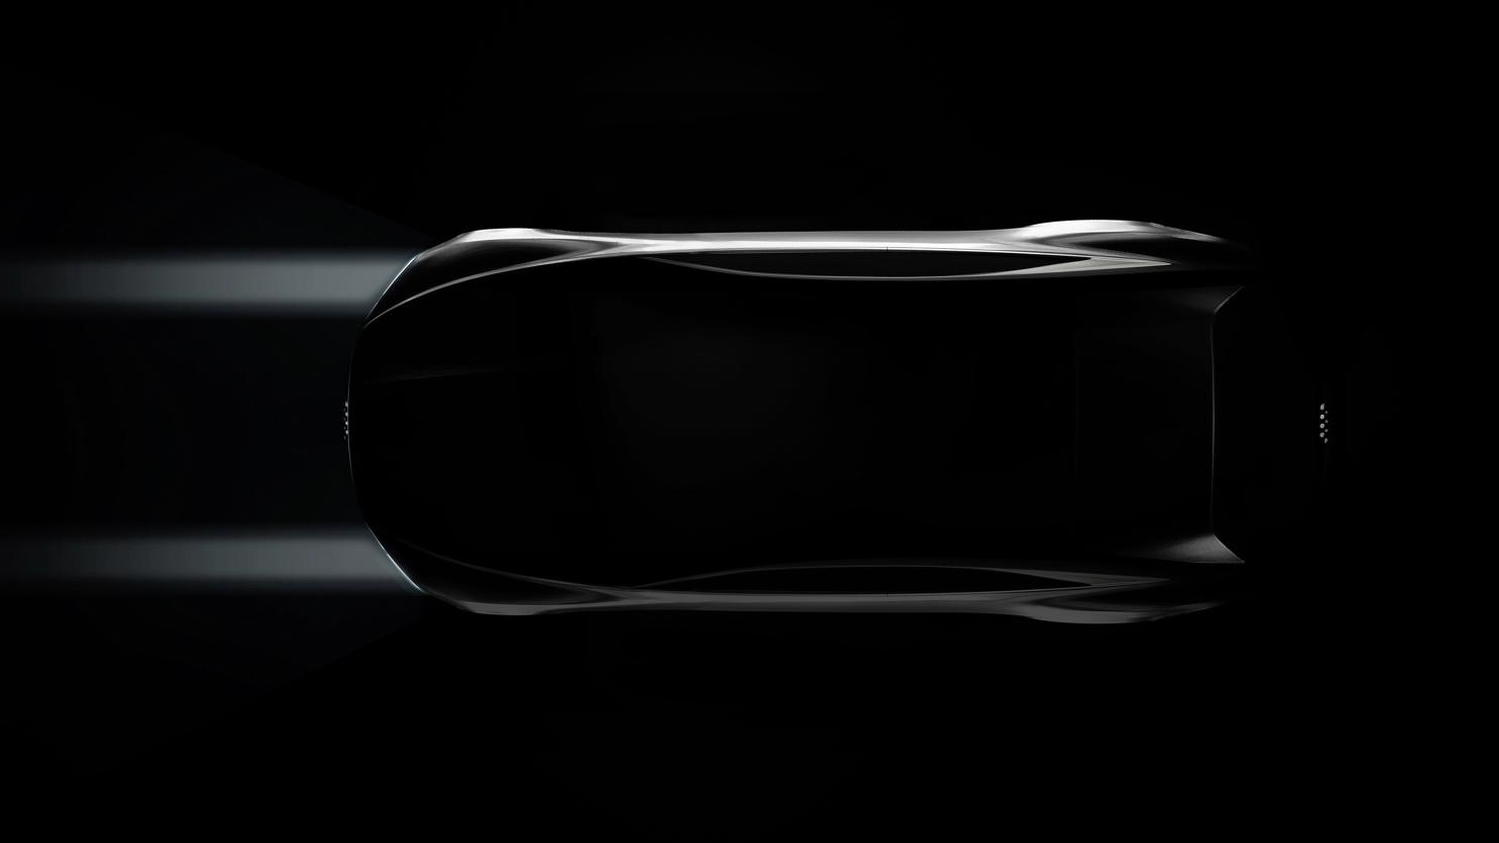 Teaser for new Audi design concept debuting at the 2014 Los Angeles Auto Show